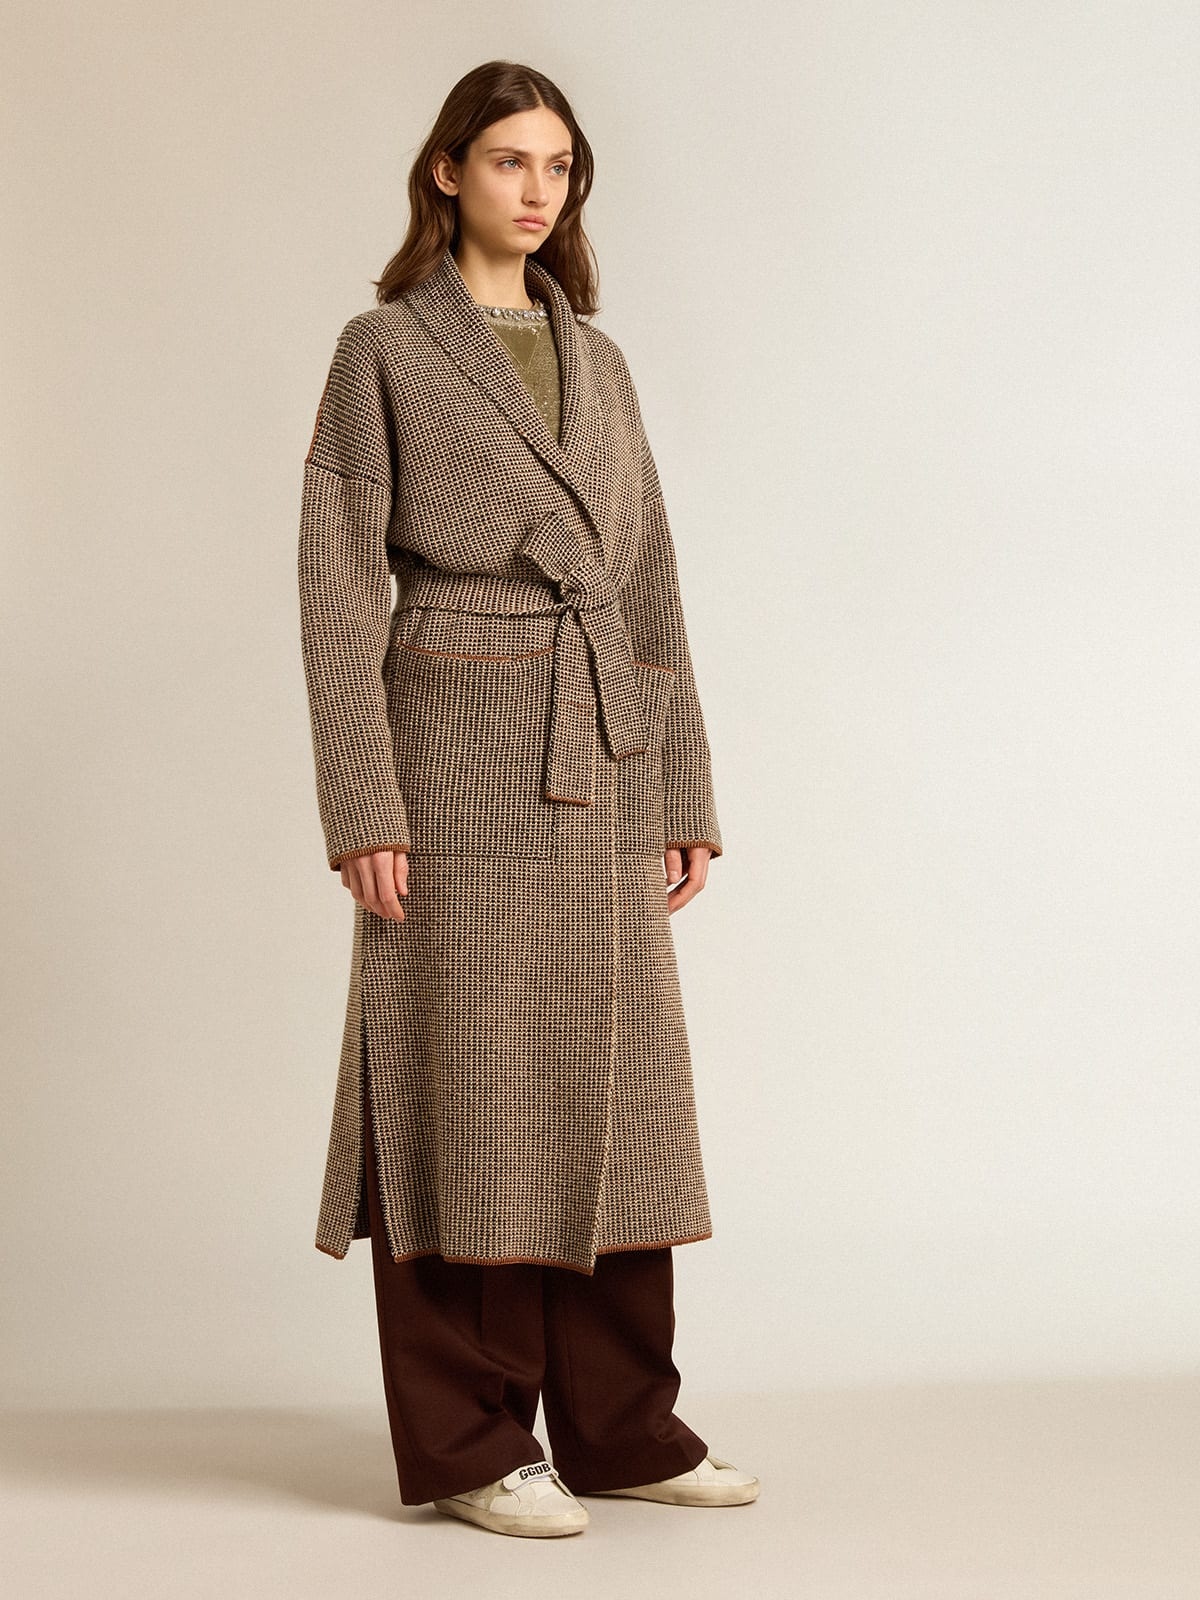 Long brown cardigan with belt - 5